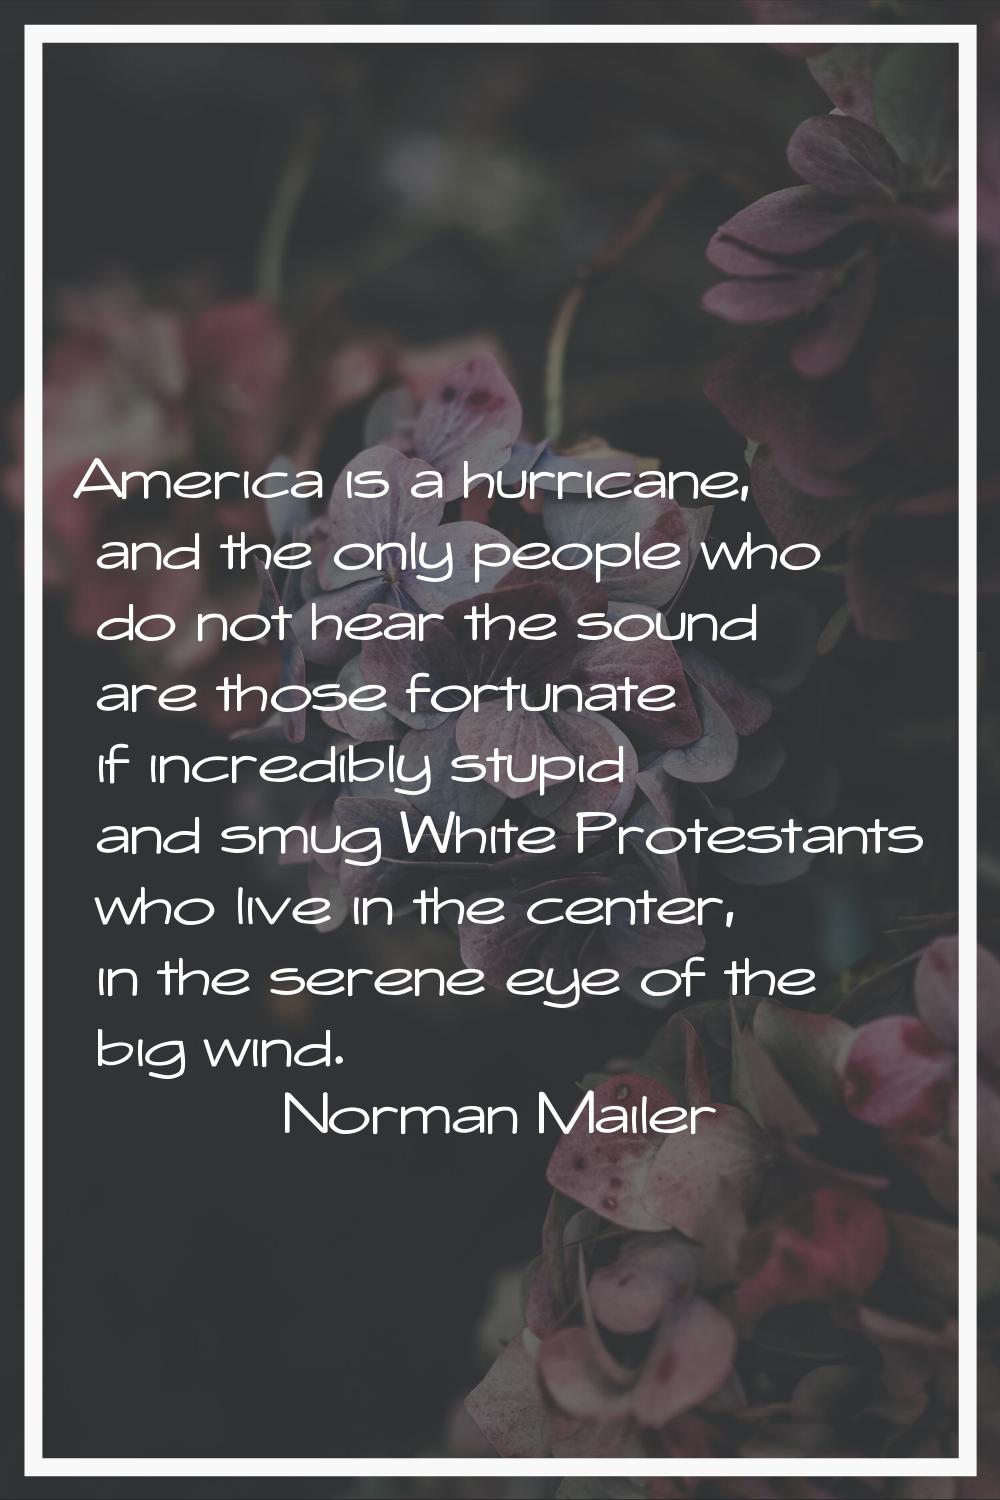 America is a hurricane, and the only people who do not hear the sound are those fortunate if incred